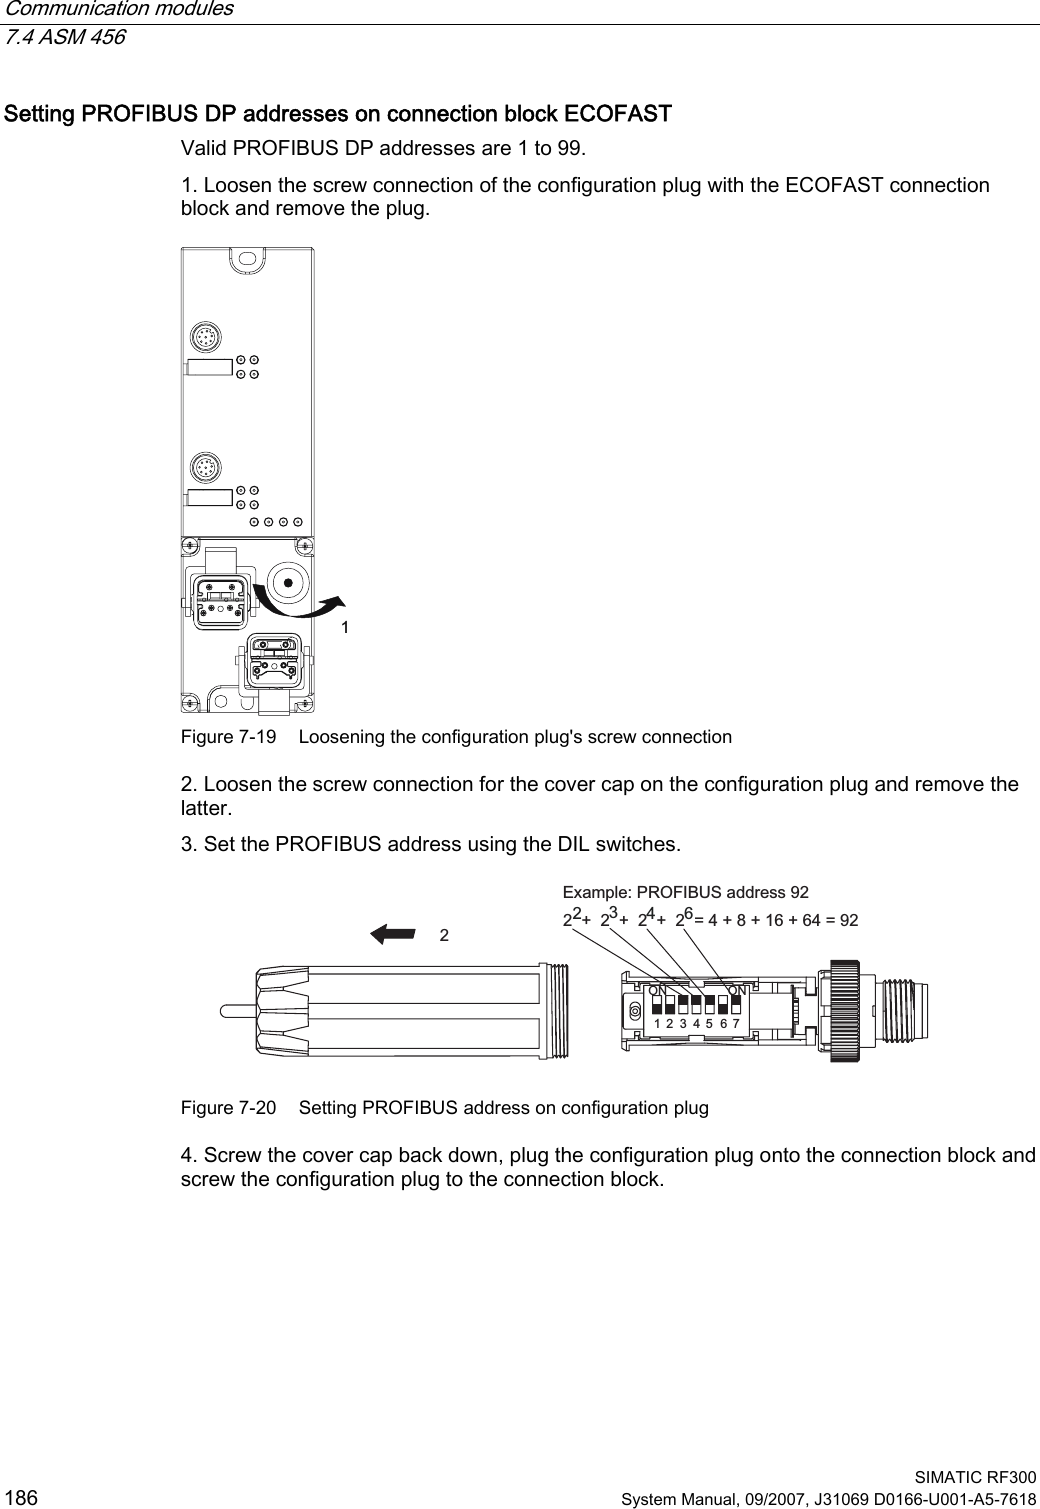 Communication modules   7.4 ASM 456  SIMATIC RF300 186 System Manual, 09/2007, J31069 D0166-U001-A5-7618 Setting PROFIBUS DP addresses on connection block ECOFAST Valid PROFIBUS DP addresses are 1 to 99.  1. Loosen the screw connection of the configuration plug with the ECOFAST connection block and remove the plug.  Figure 7-19  Loosening the configuration plug&apos;s screw connection 2. Loosen the screw connection for the cover cap on the configuration plug and remove the latter. 3. Set the PROFIBUS address using the DIL switches. ([DPSOH352),%86DGGUHVV  21 21  Figure 7-20  Setting PROFIBUS address on configuration plug 4. Screw the cover cap back down, plug the configuration plug onto the connection block and screw the configuration plug to the connection block. 